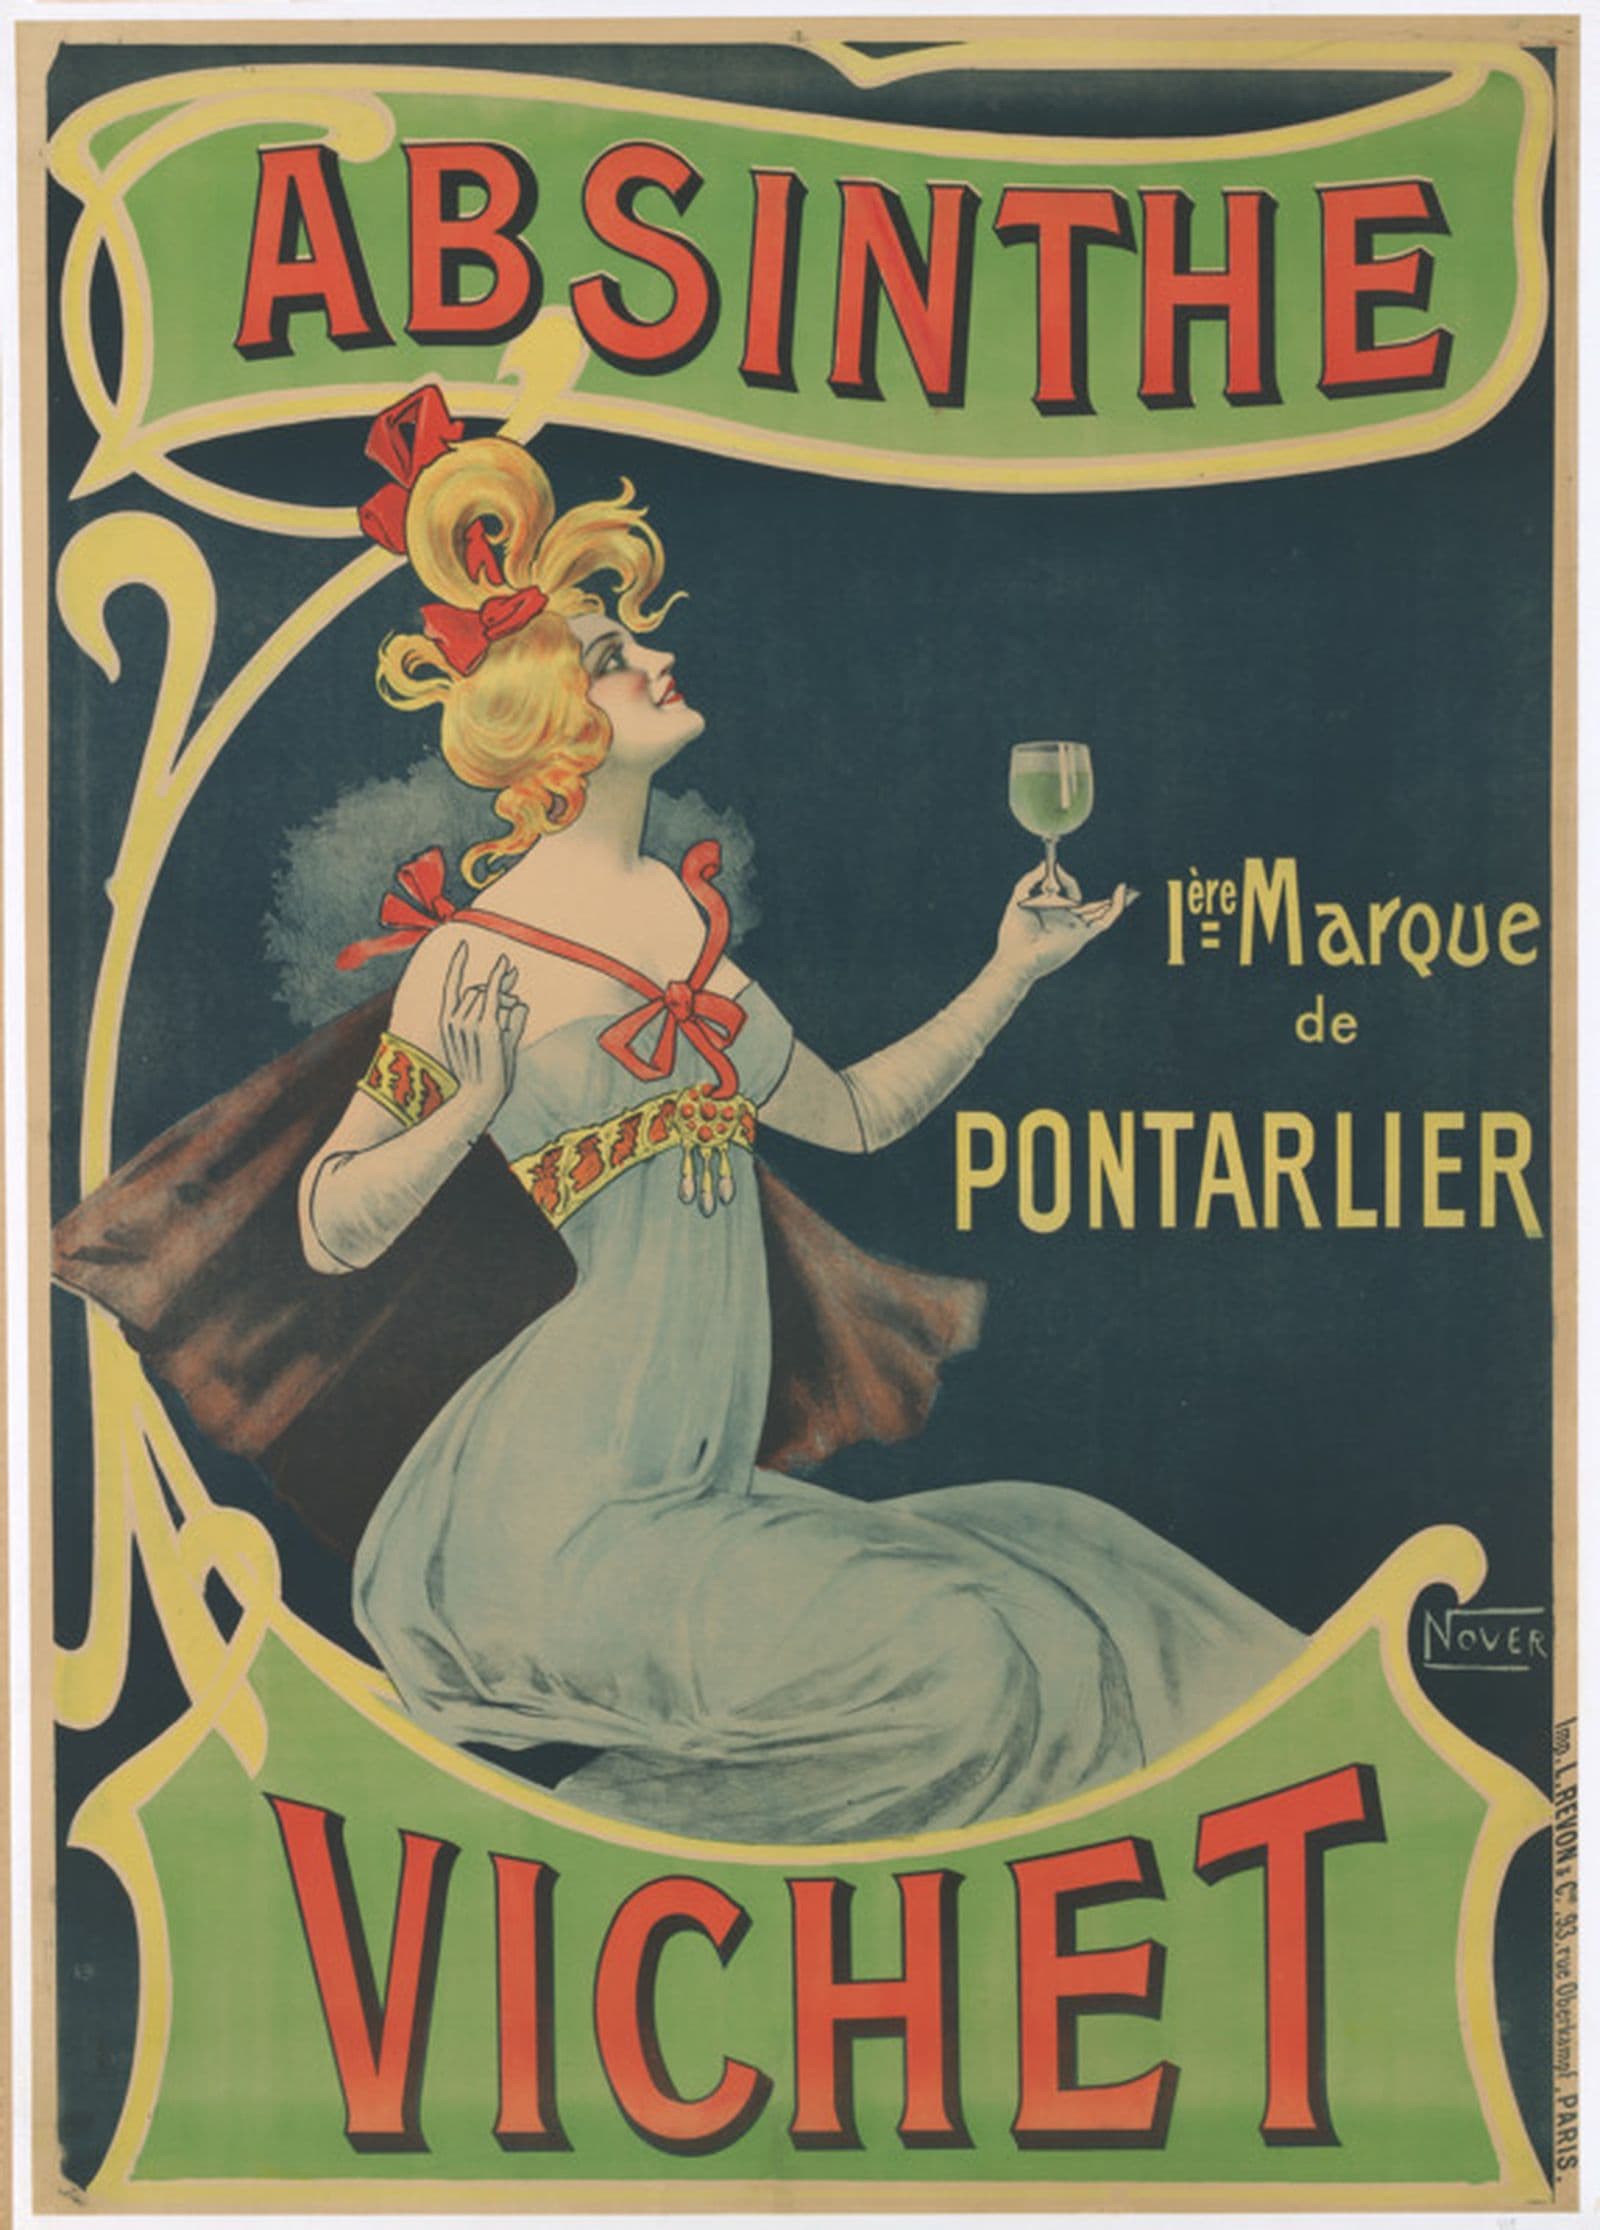 A lithograph poster of a woman enjoying a glass of absinthe and the words absinthe vichet are in red text against a green banner.